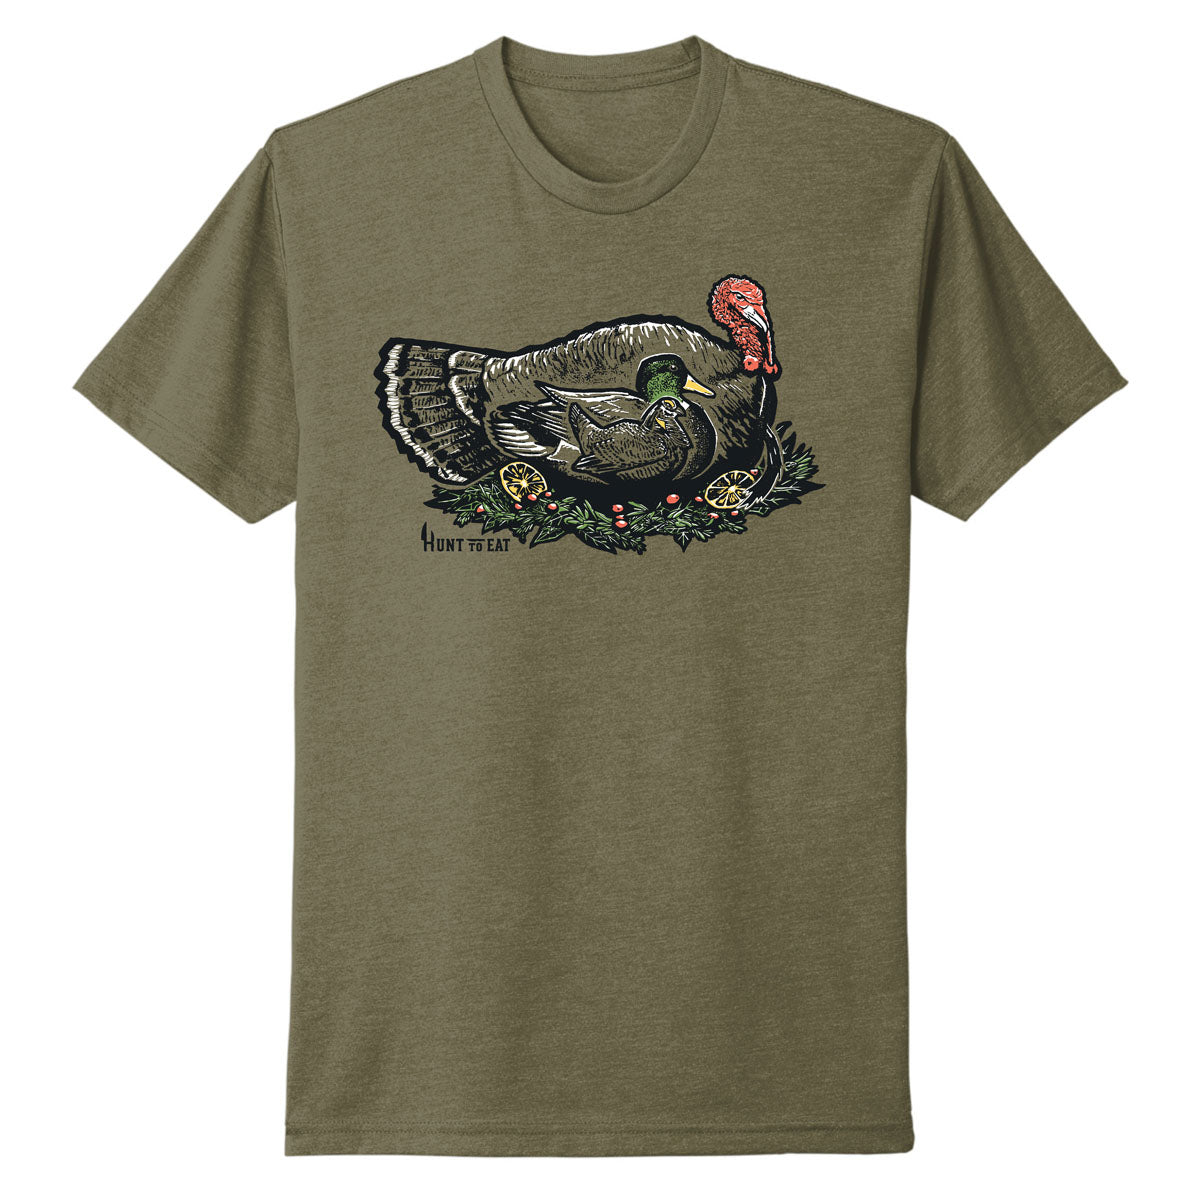 Turducken T-Shirt by Hunt To Eat.  Olive Green T-Shirt decorated with an illustration of a wild Prarie Chicken inside a Mallard Duck inside a Wild Turkey 